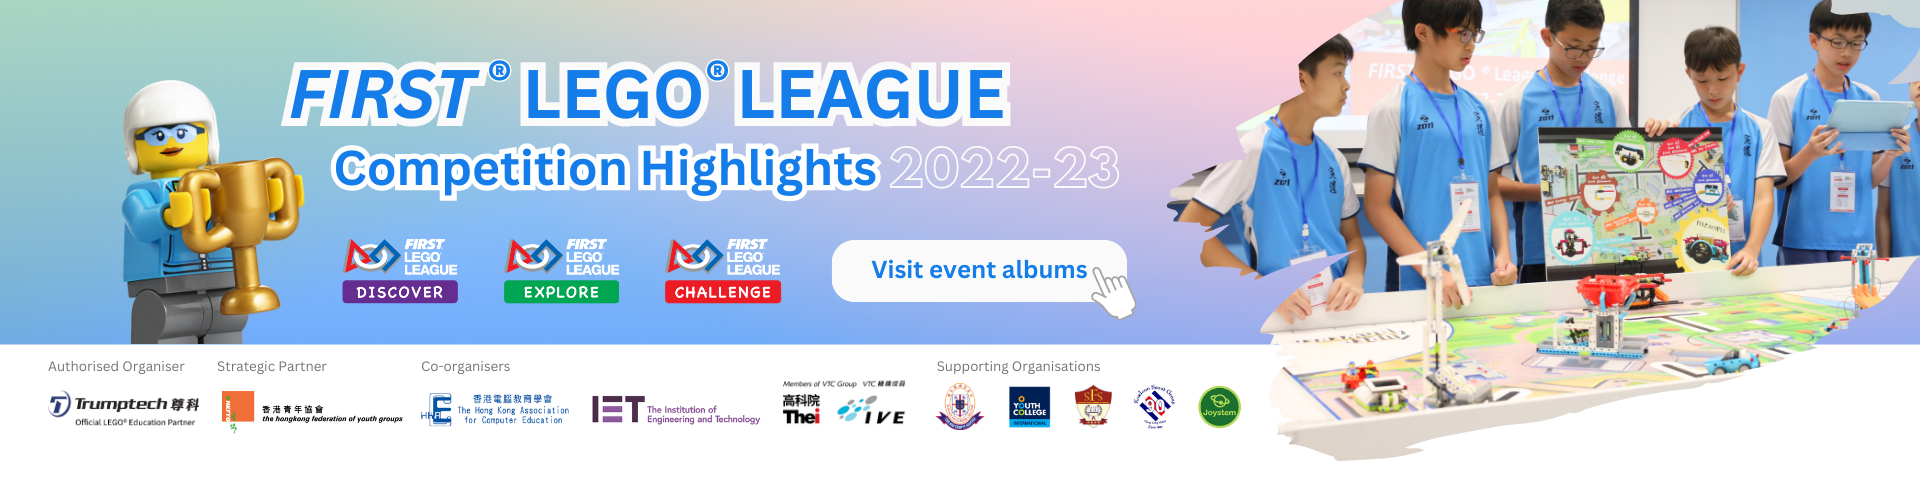 FIRST® LEGO® League 2022-23 Competition Highlights!